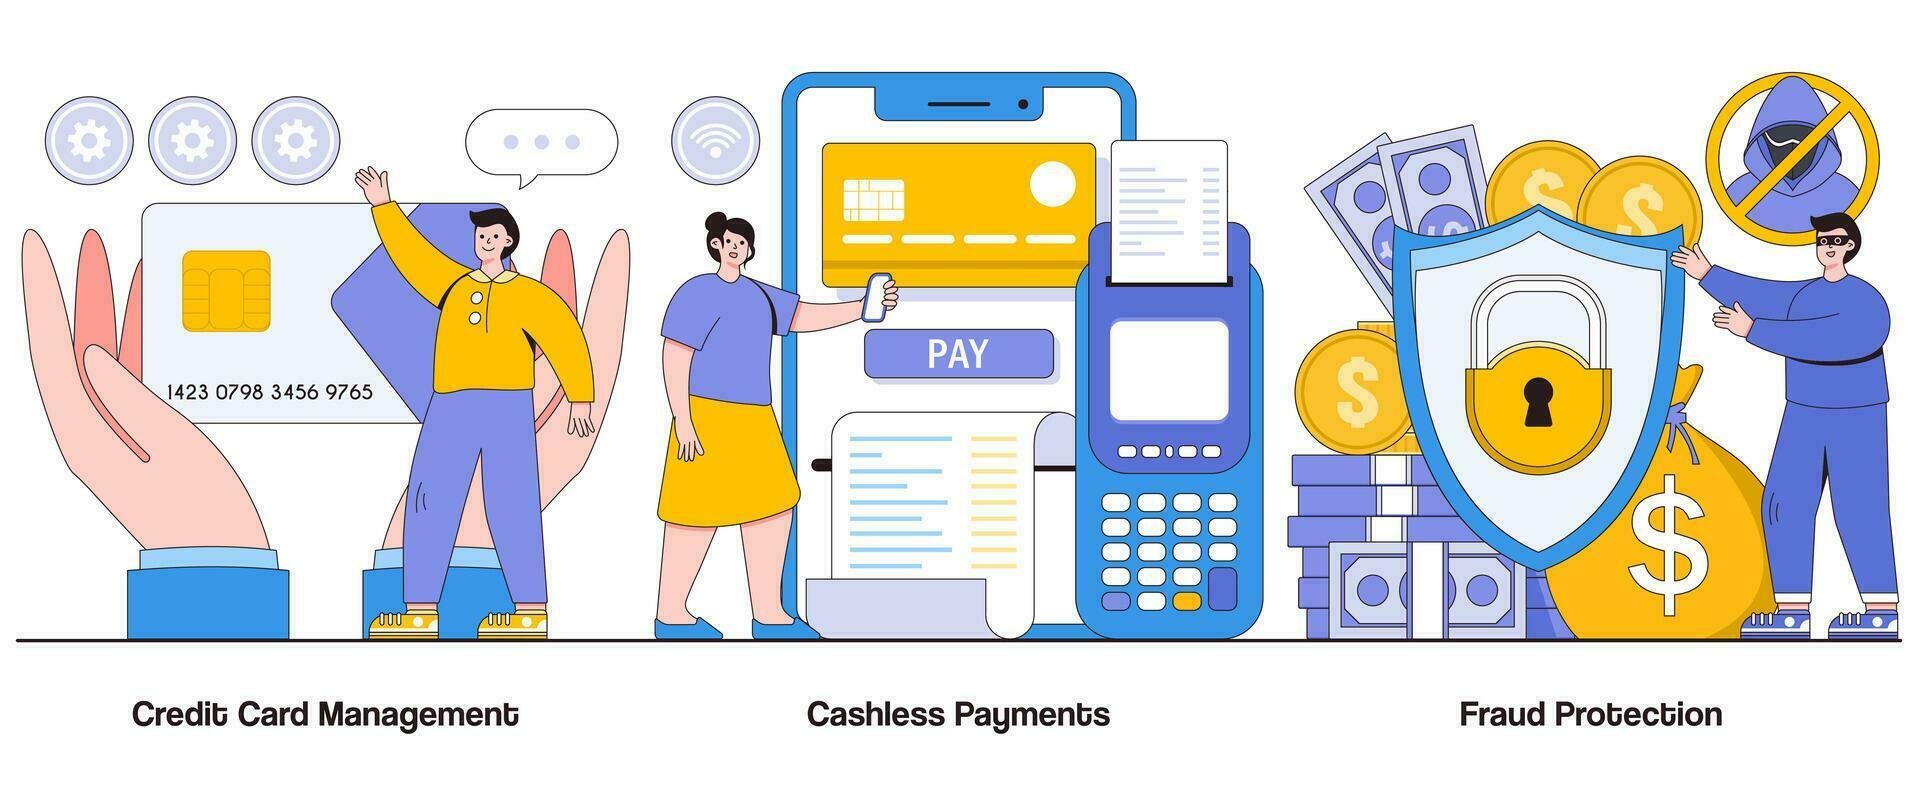 Credit card management, cashless payments, fraud protection concept with character. Payment security abstract vector illustration set. Contactless transactions, secure banking, fraud prevention